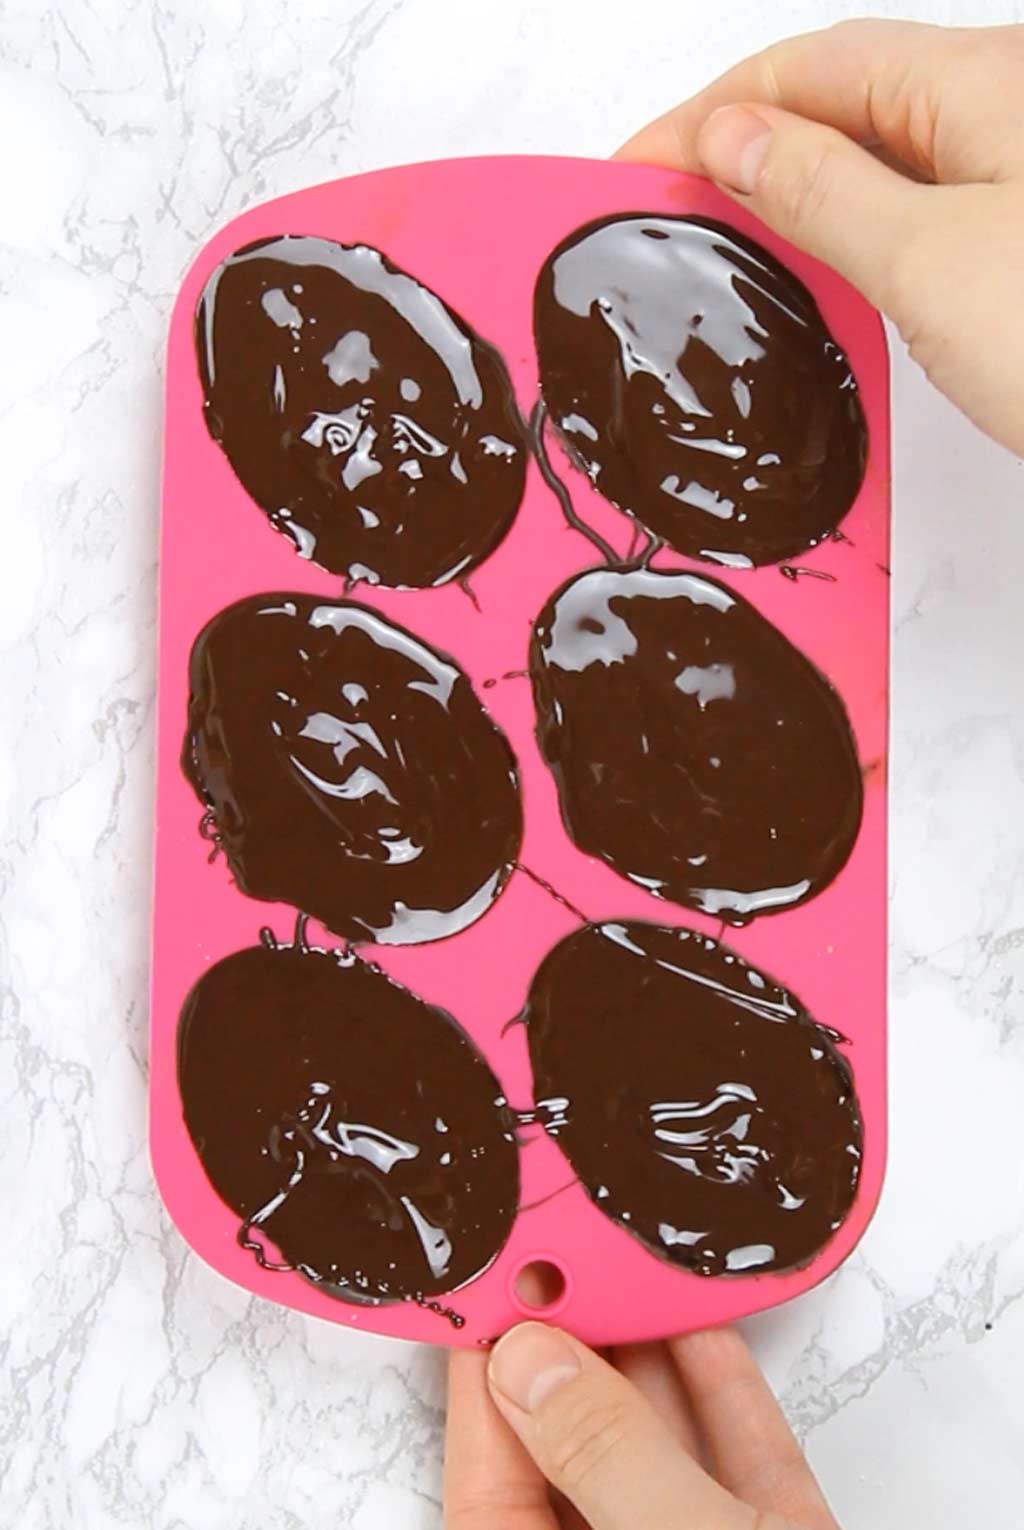 chocolate covered egg halves in the mold